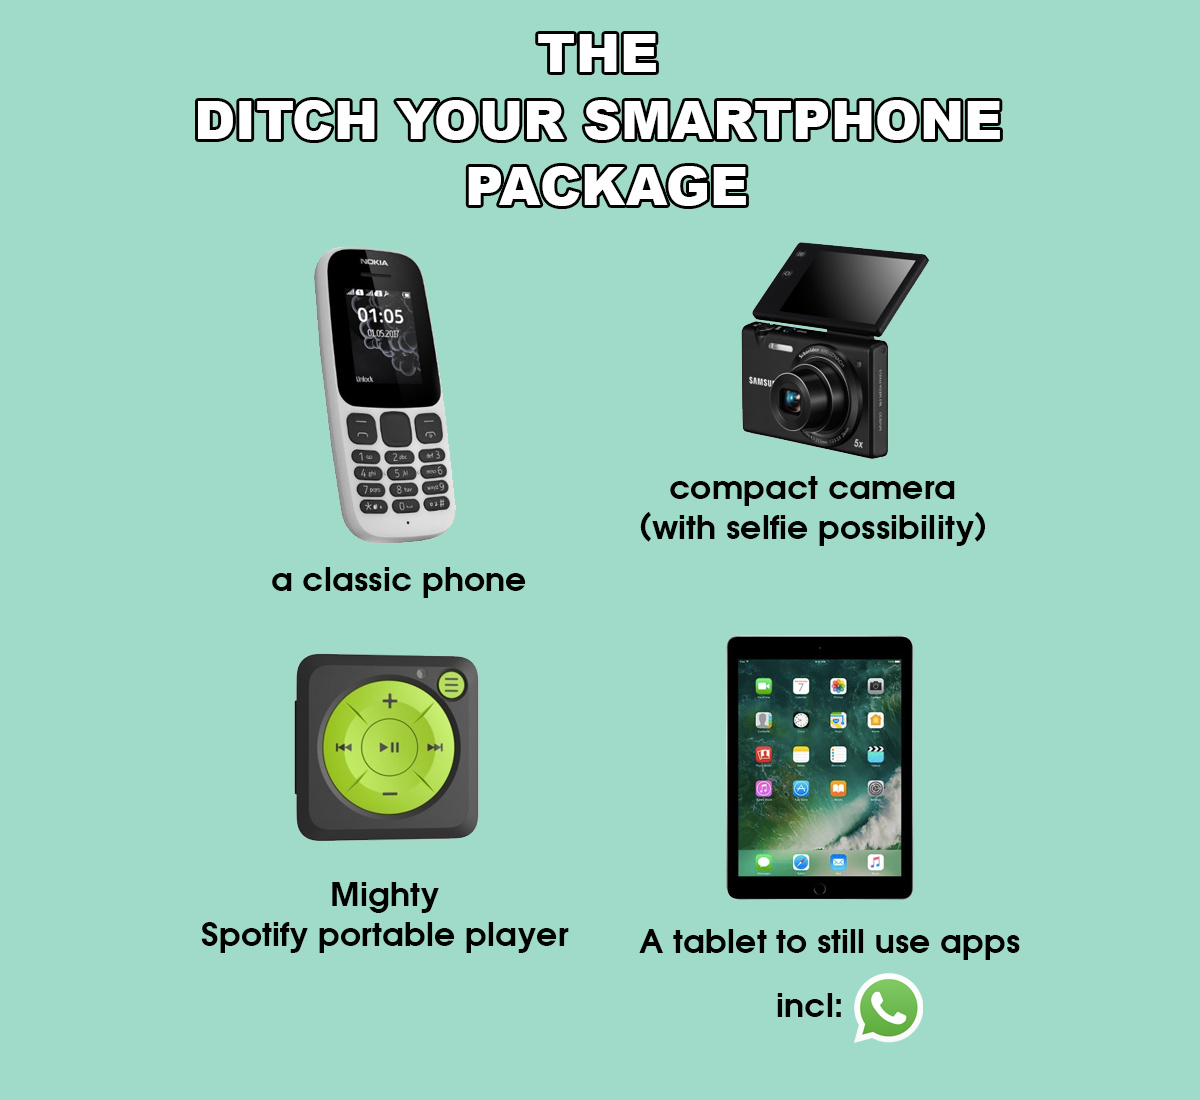 Ditch your smartphone and get your life back - meme